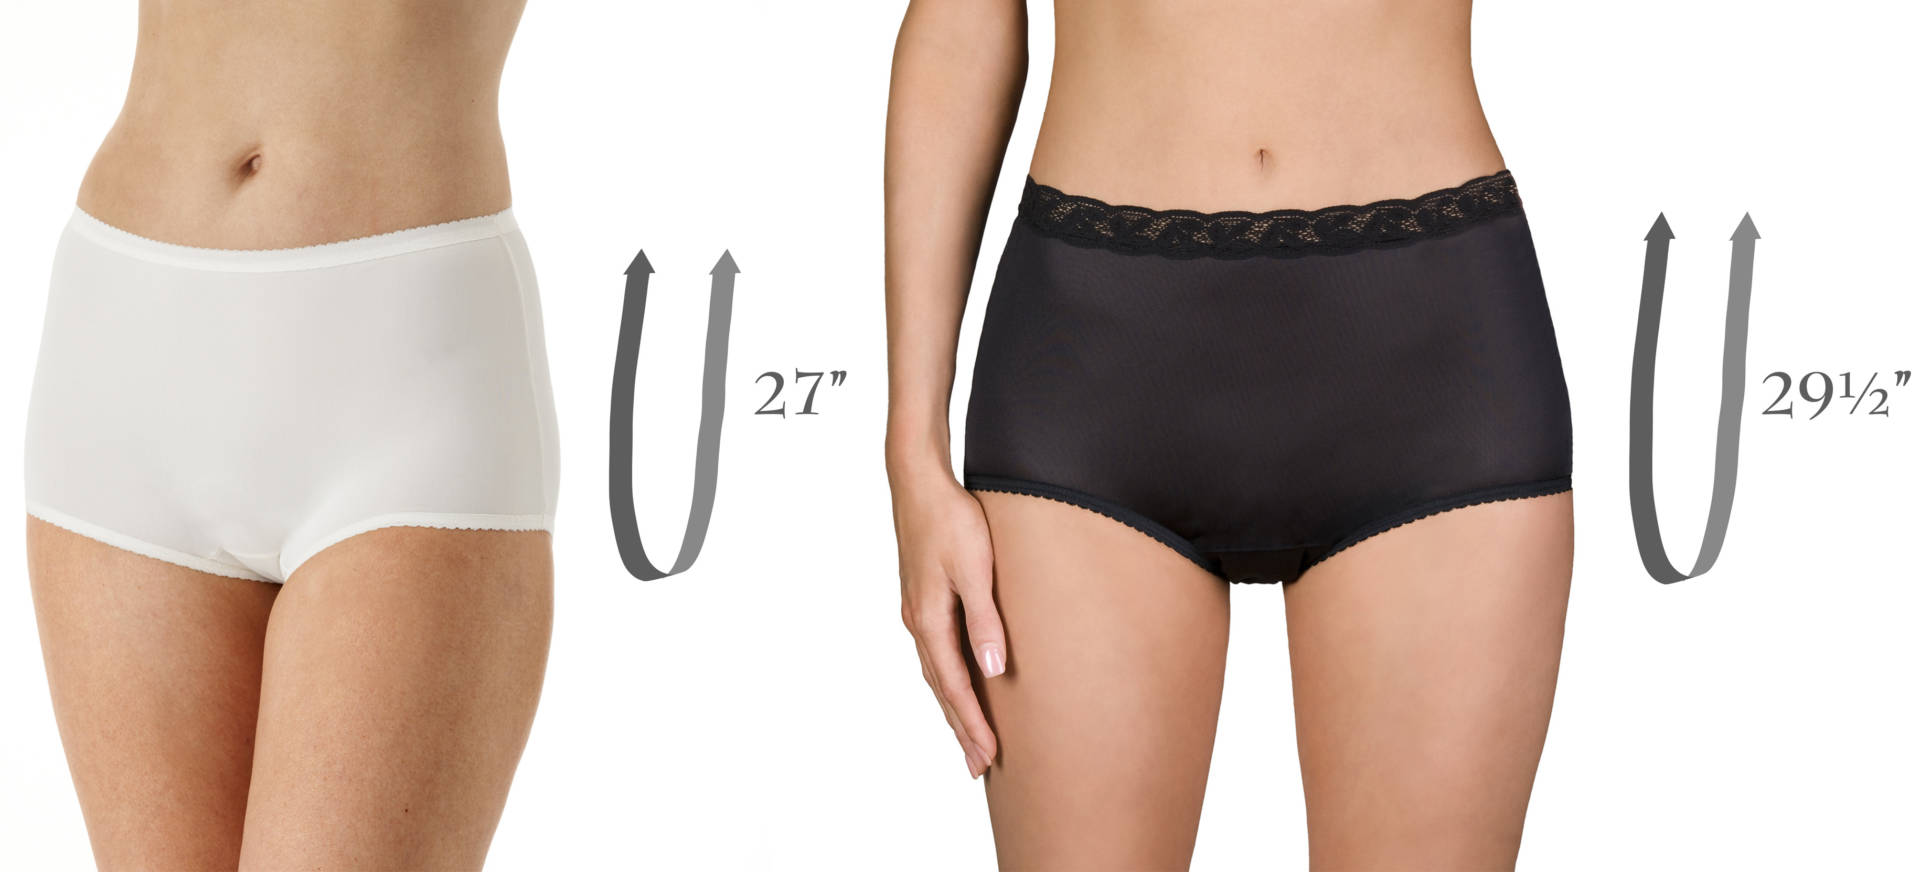 What Are the Types of Panty Waist Levels?